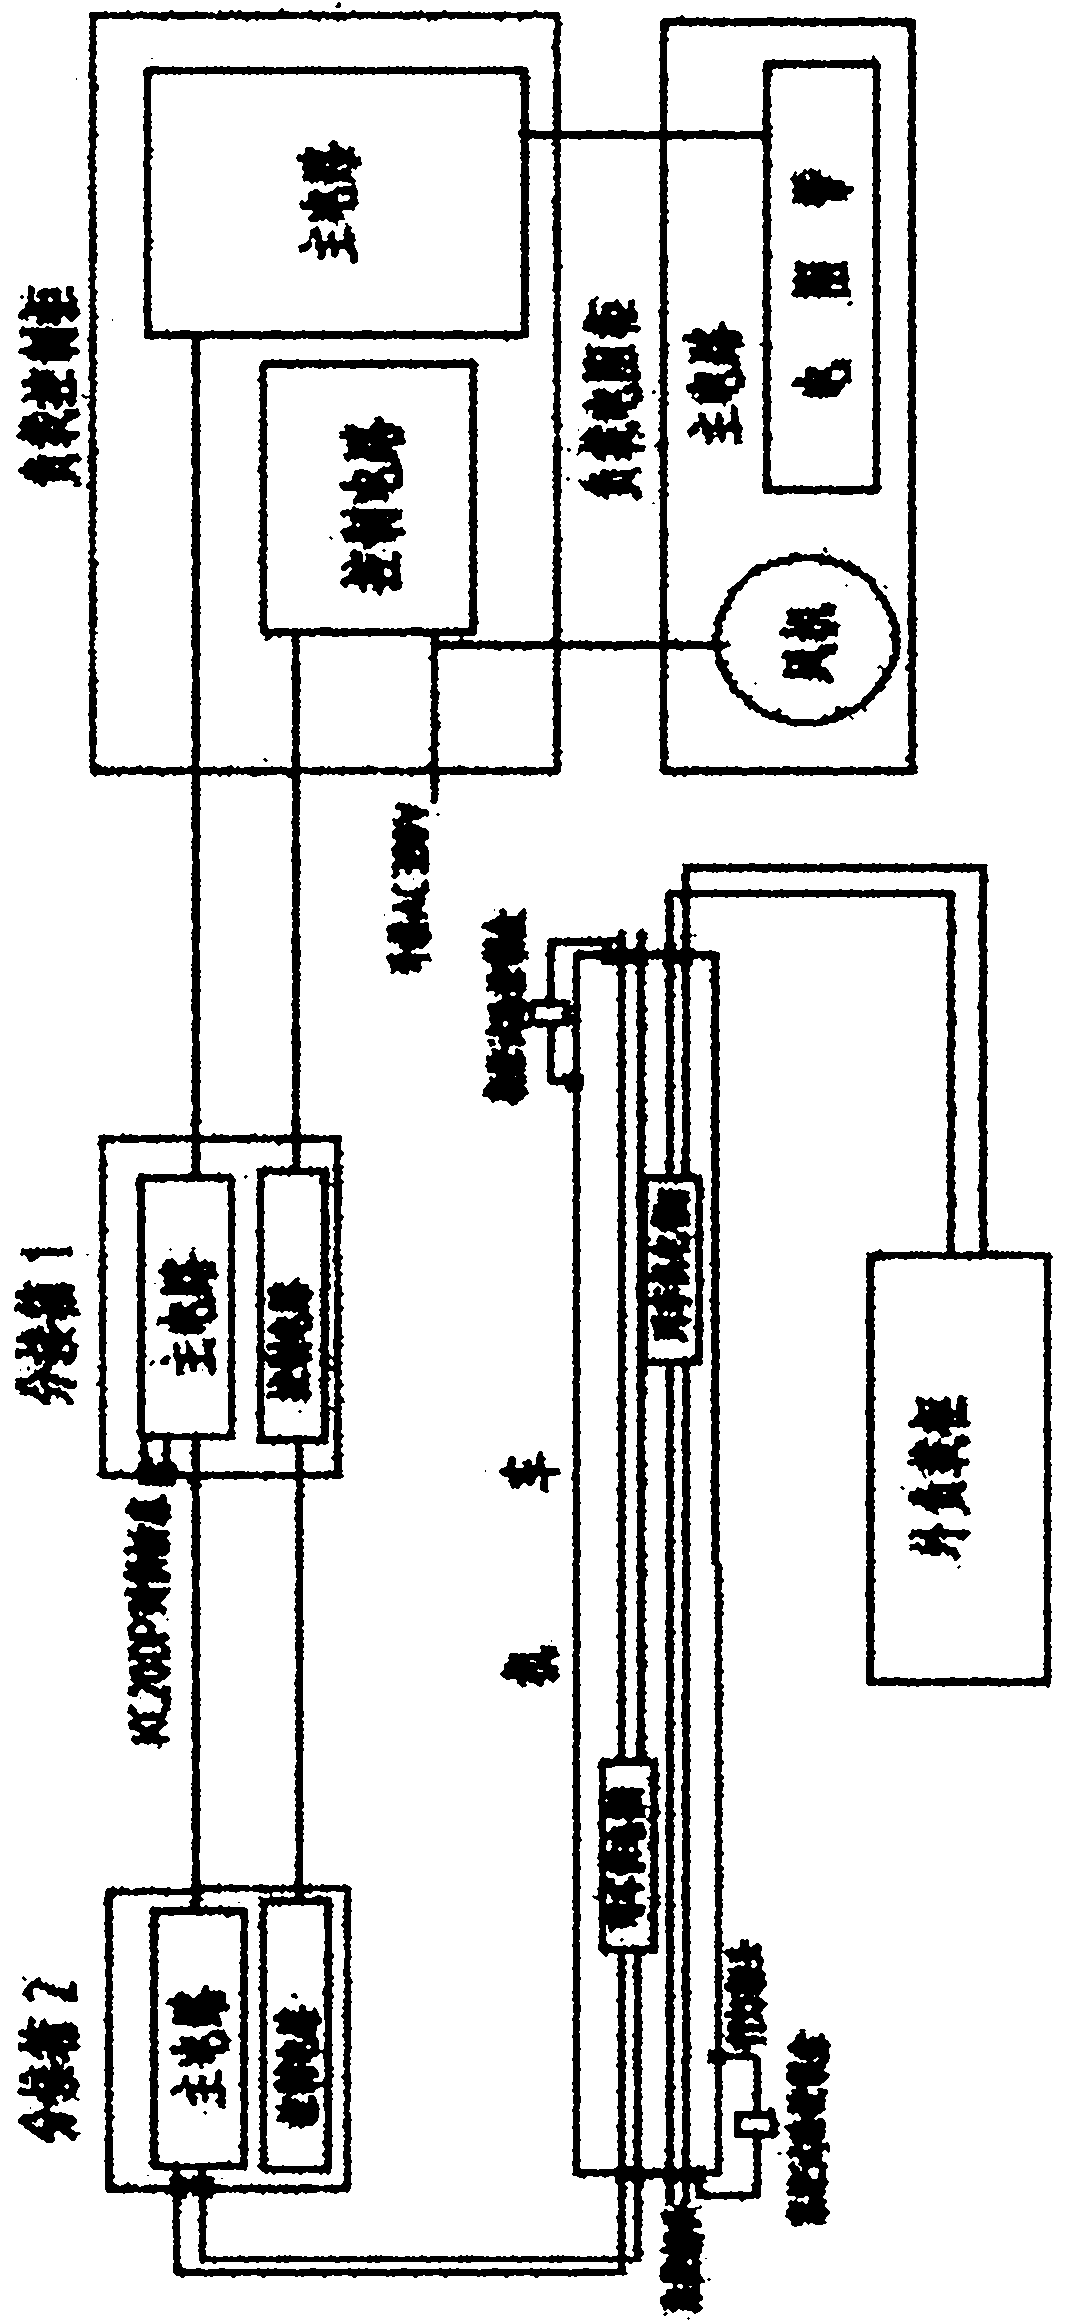 Test device for train power supply system of electric locomotive